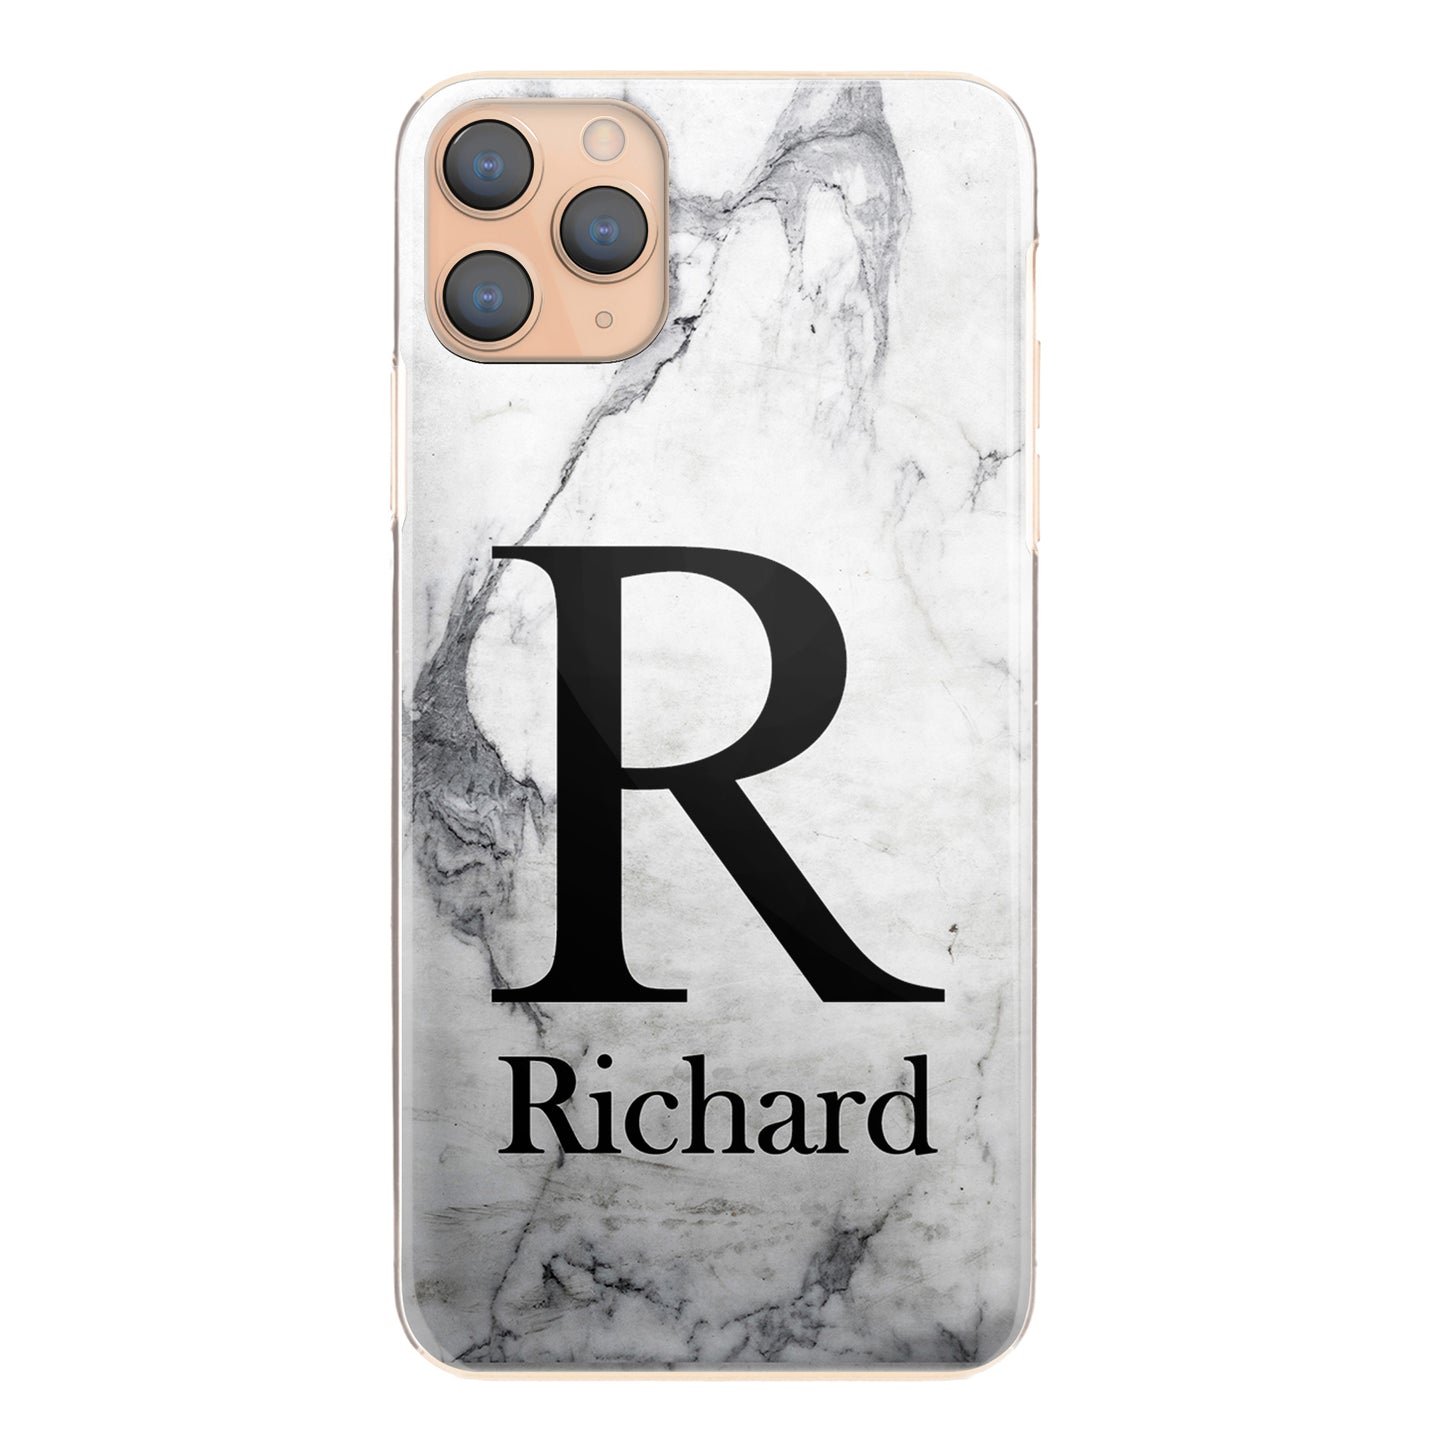 Personalised HTC Phone Hard Case with Traditional Monogram and Text on Grey Marble